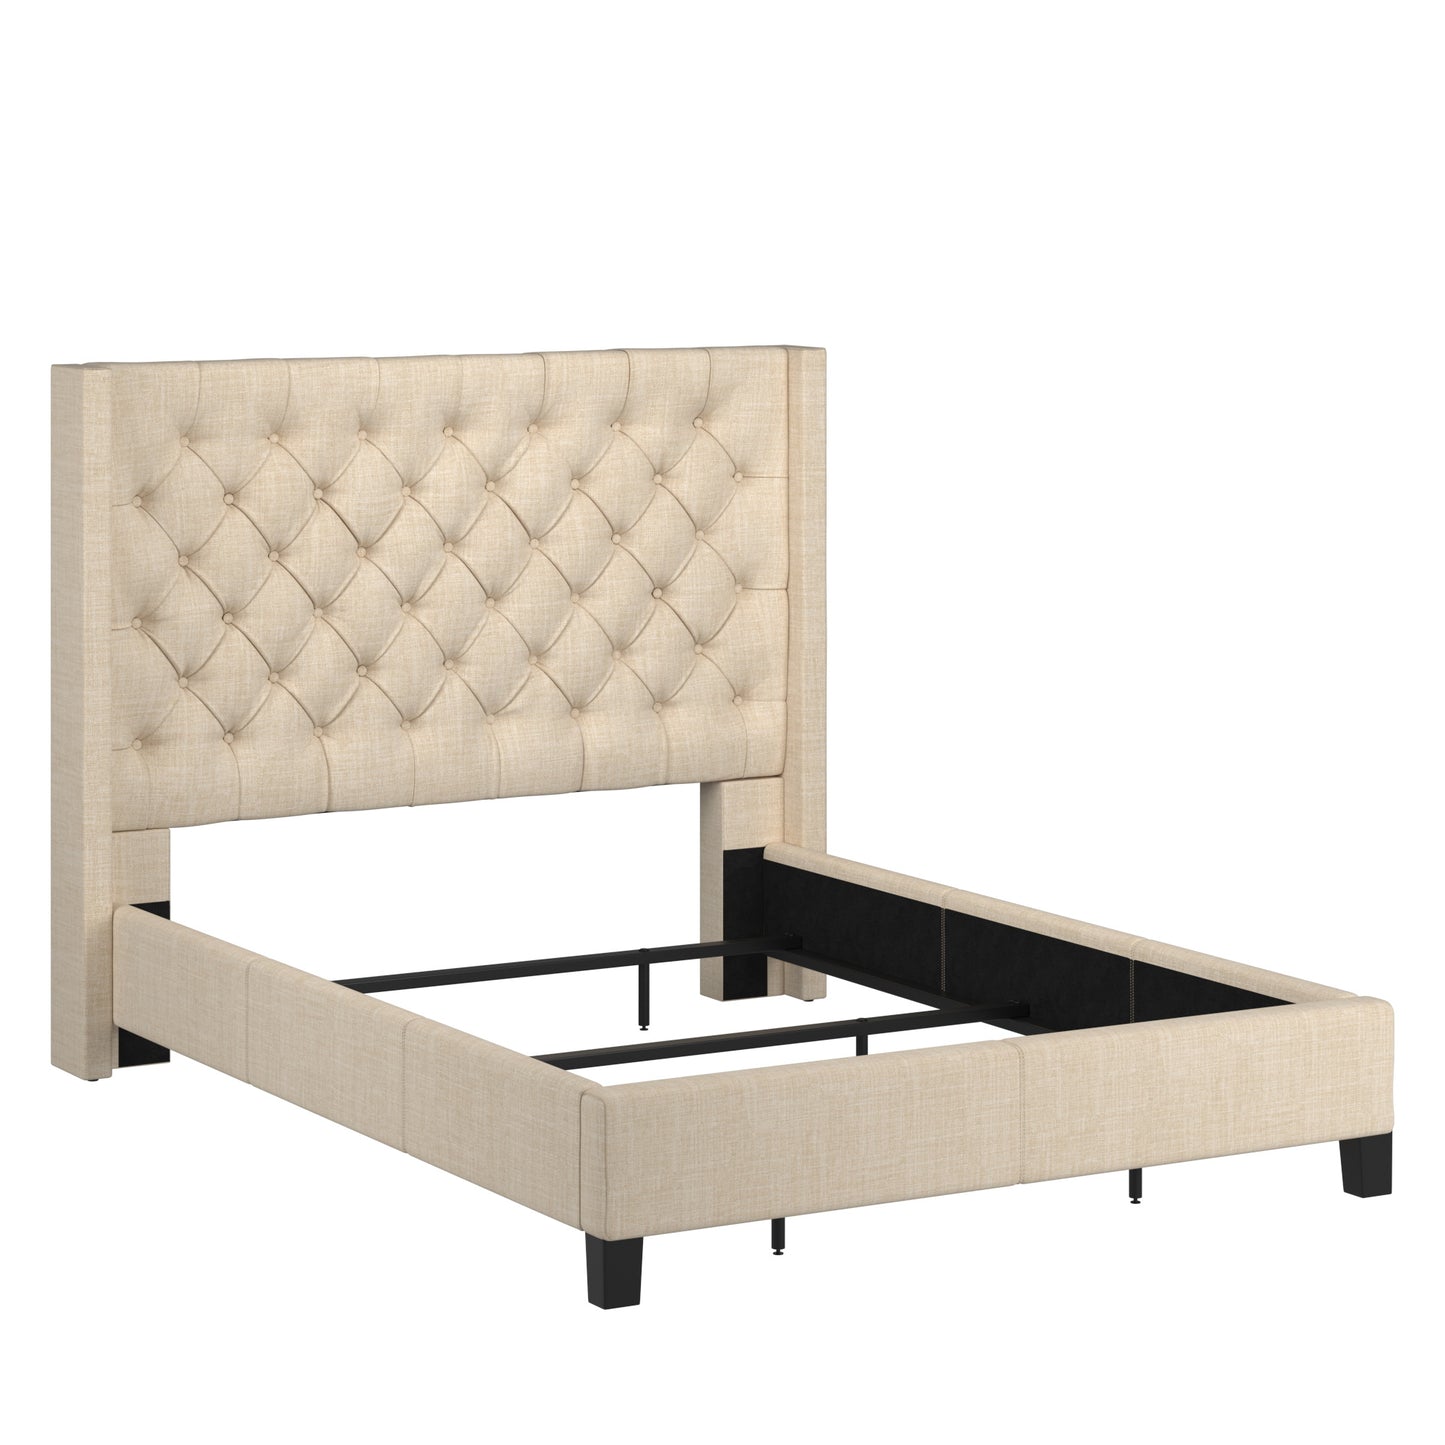 Wingback Button Tufted Bed - Beige Linen, Full